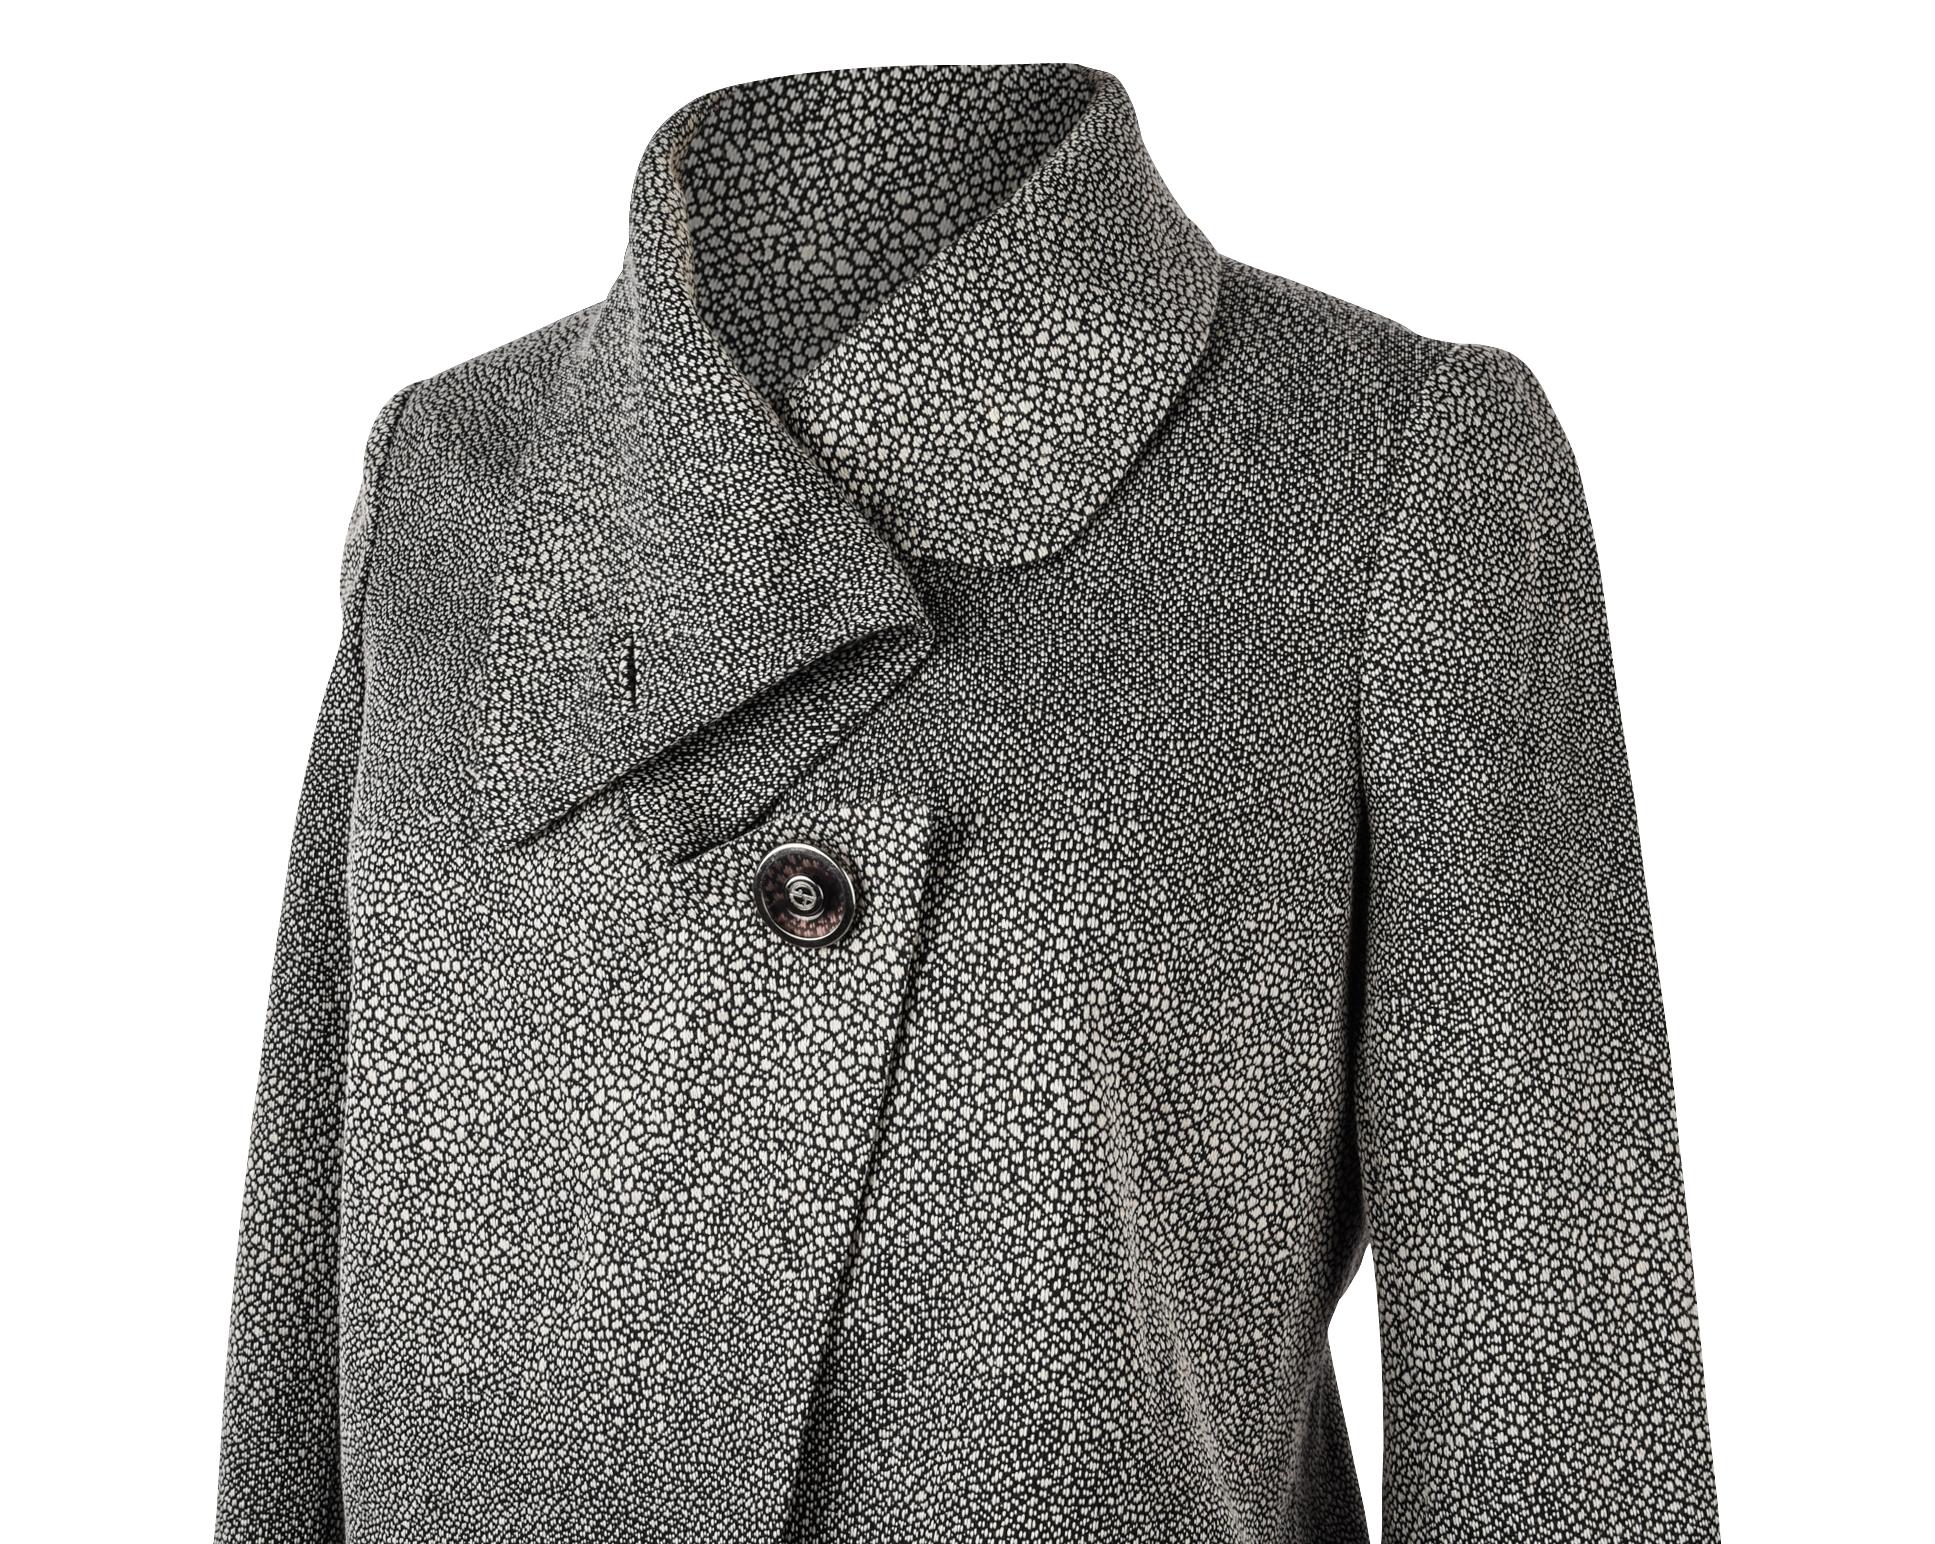 Guaranteed authentic Giorgio Armani unique stingray black and light gray styled print.
Dramatic collar can be worn a myriad of ways.
Off center clear and metal button is placed high toward neckline with peak lapel design.  
Modified swing jacket